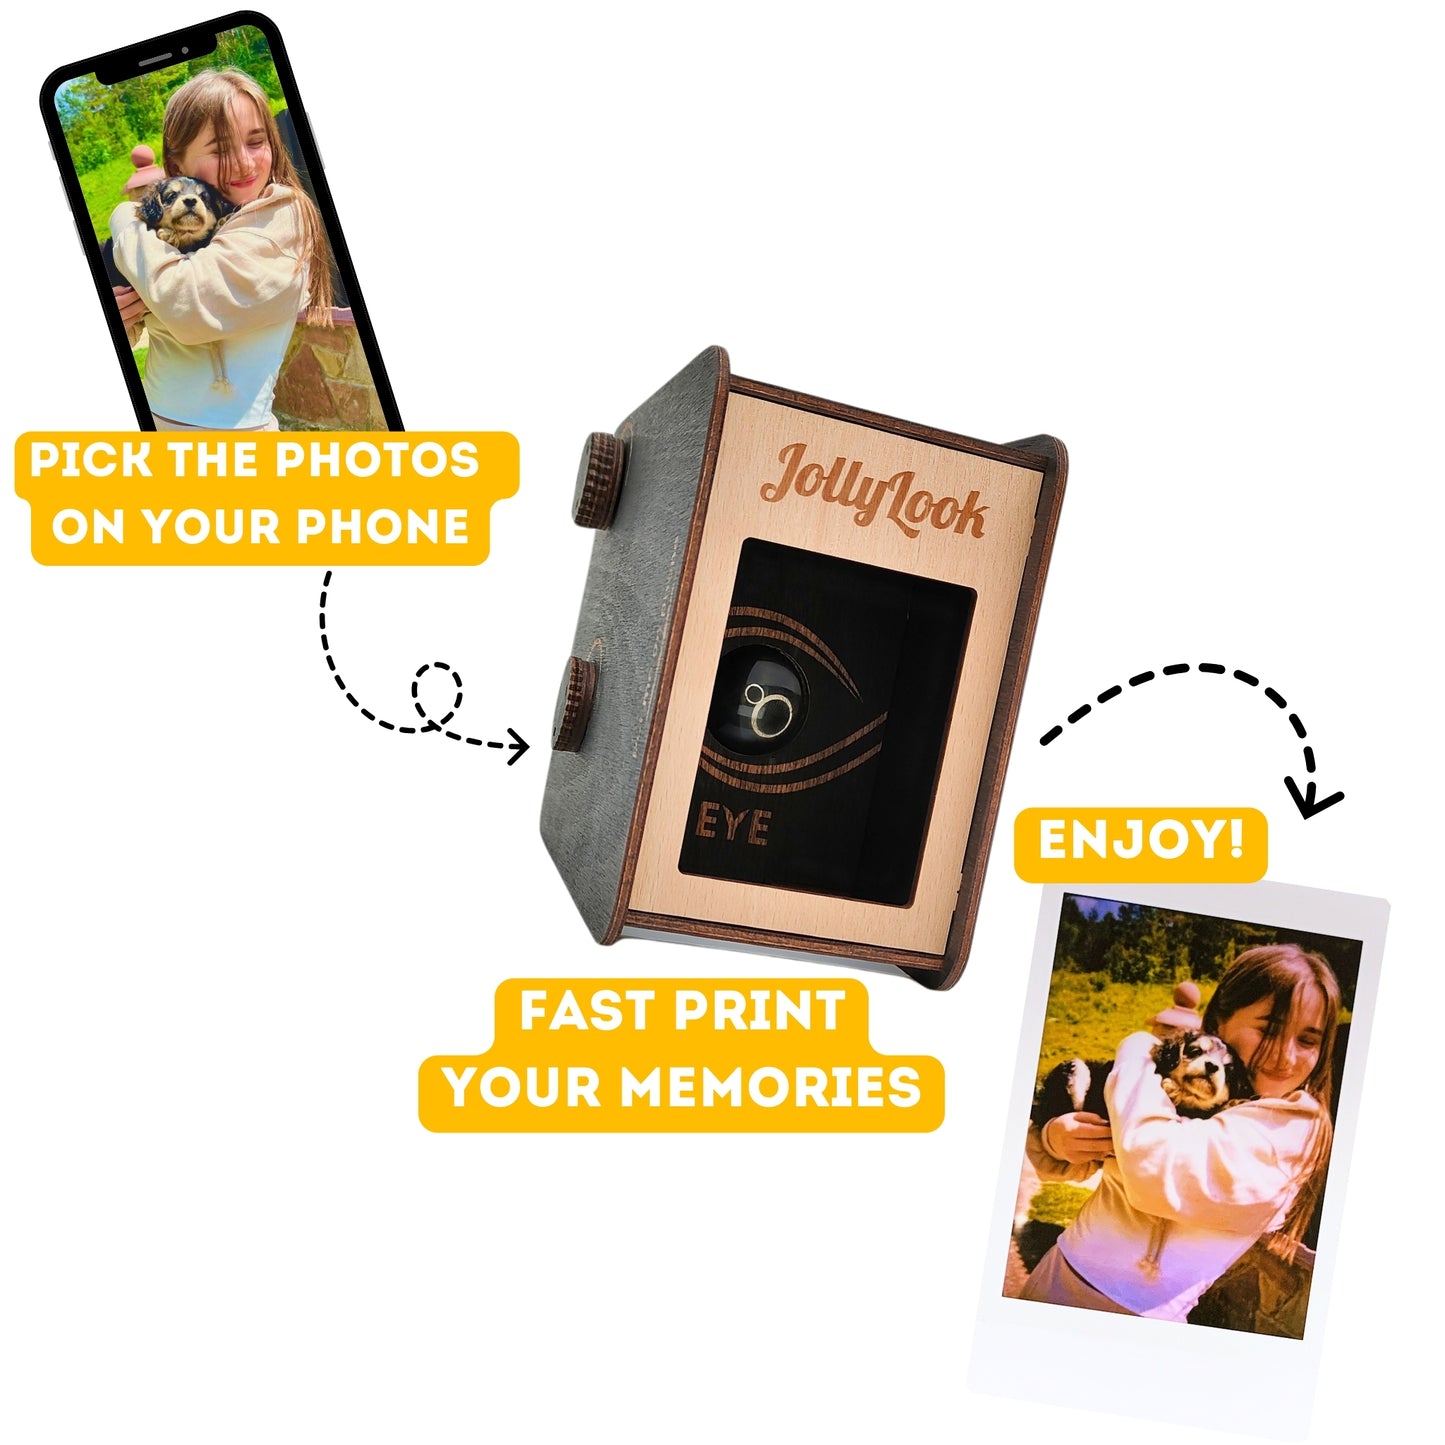 A white background featuring a Jollylook EYE instant printer, a smartphone, and an instant photo. The text on the image reads 'Pick the photos on your phone,' 'Fast print your memories,' and 'Enjoy.'"